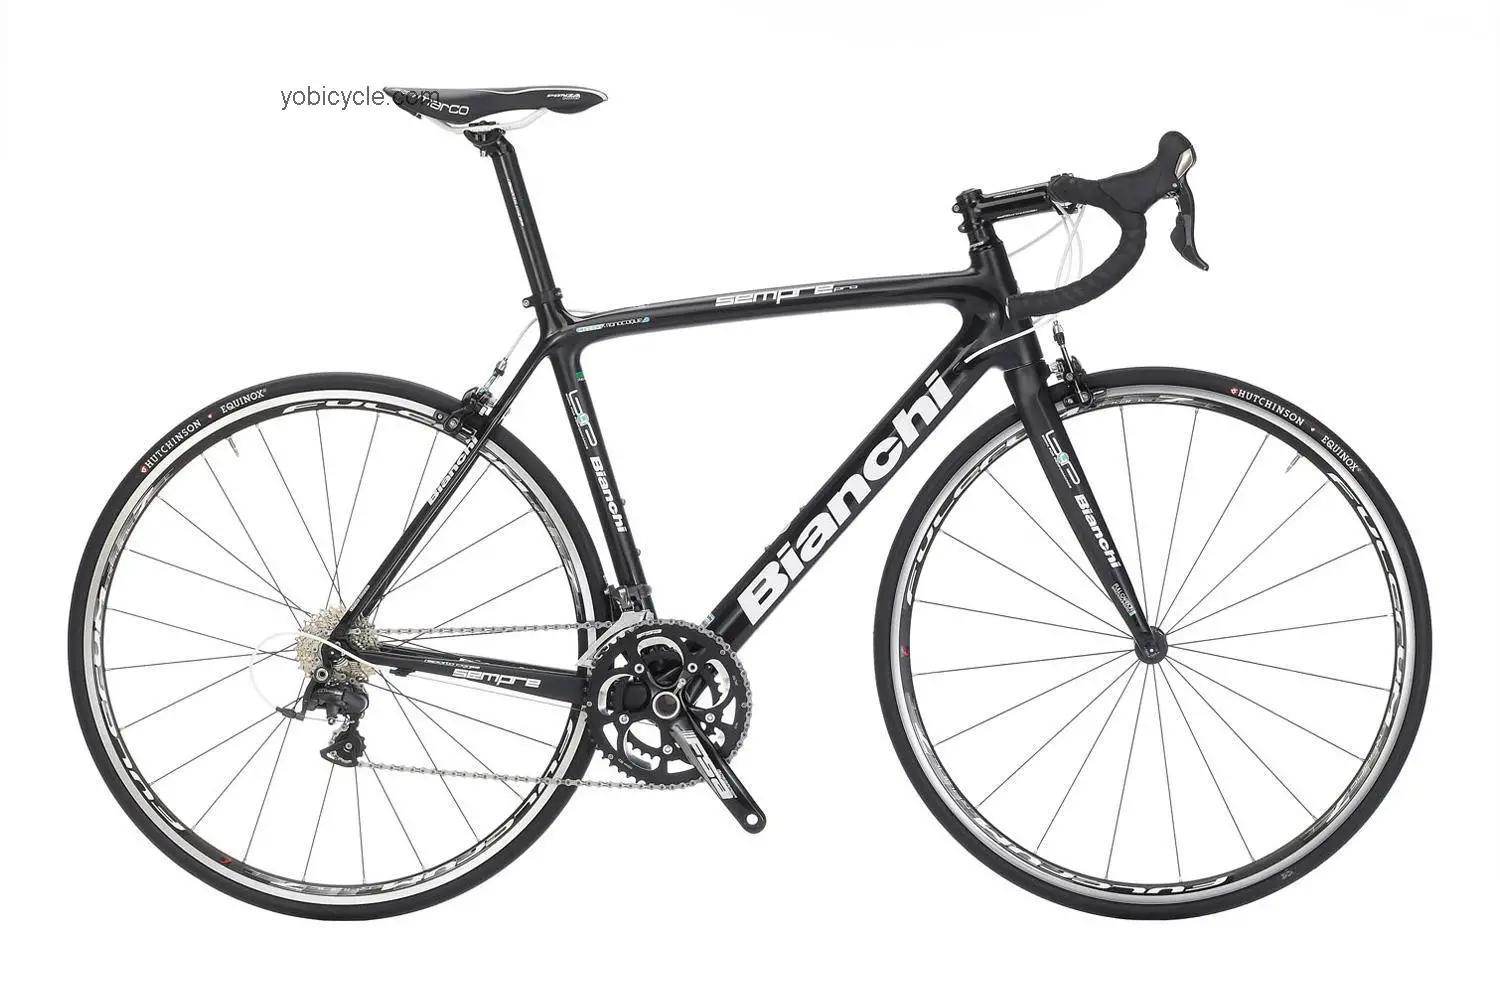 Bianchi  Sempre Ultegra Technical data and specifications